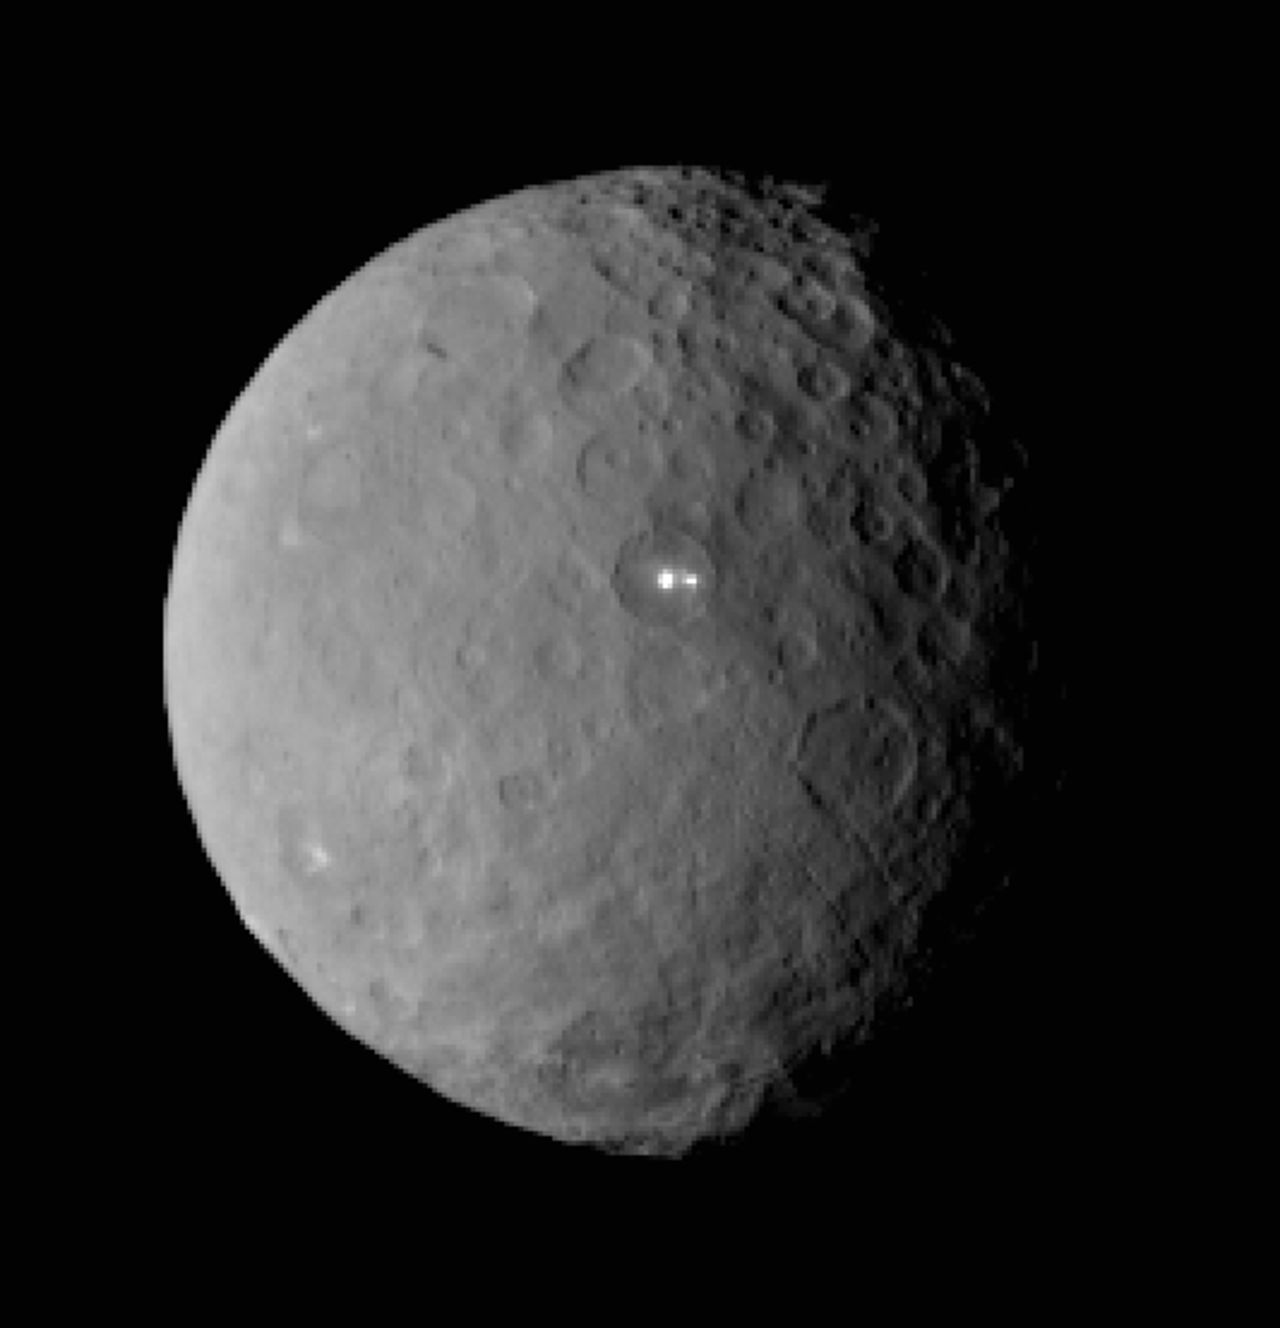 NASA's <a href="http://www.nasa.gov/mission_pages/dawn/main/index.html" target="_blank" target="_blank">Dawn</a> spacecraft ended its mission orbiting the dwarf planet Ceres in 2018. Scientists were surprised by the large white spots shining on Ceres, seen above. On its way to Ceres, Dawn spent time studying the proto-planet Vesta in 2001. The mission, launched in 2007, gave scientists new knowledge of how the solar system formed and evolved.